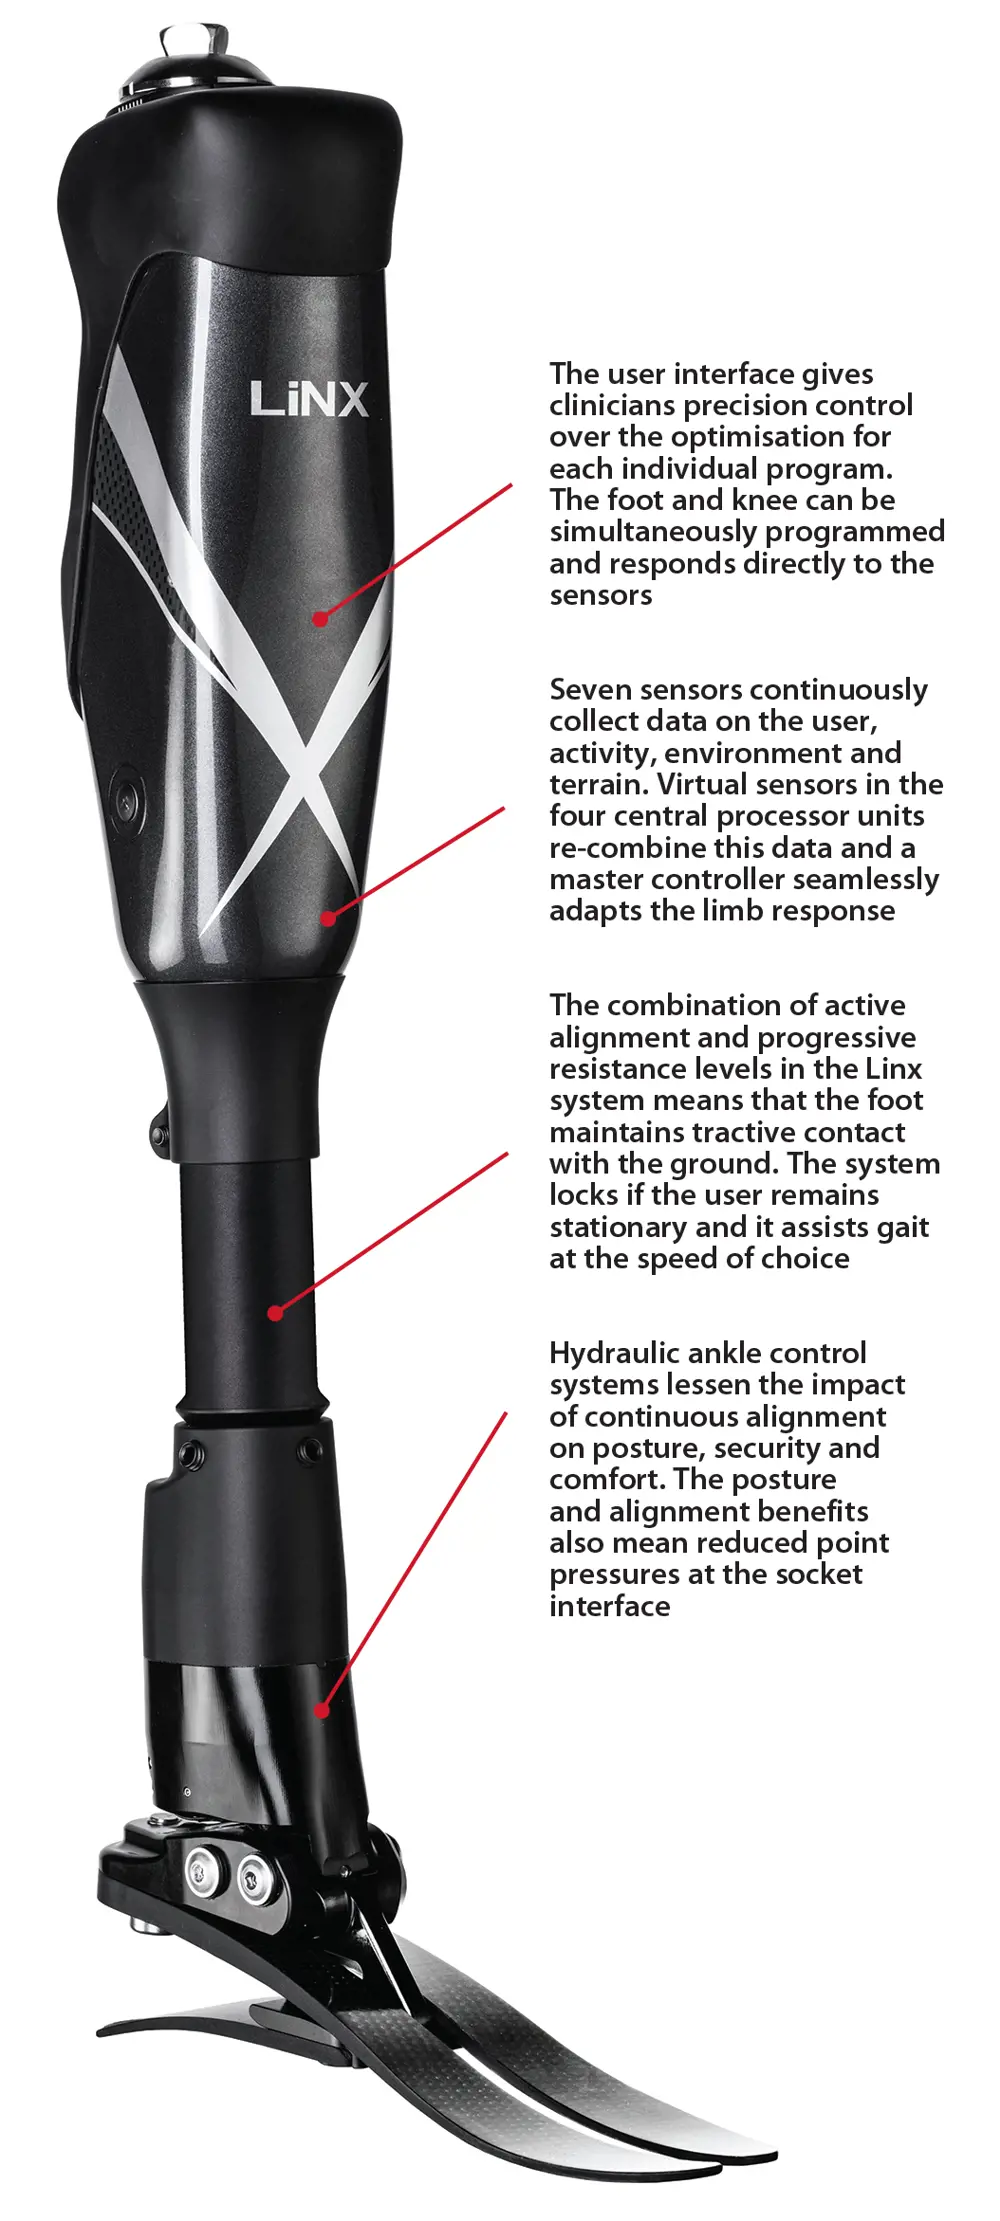 The Linx prosthetic leg labelled to show the user interface, the seven sensors to collect data, the combination of active alignment and progressive resistance levels and hydraulic ankle control systems.